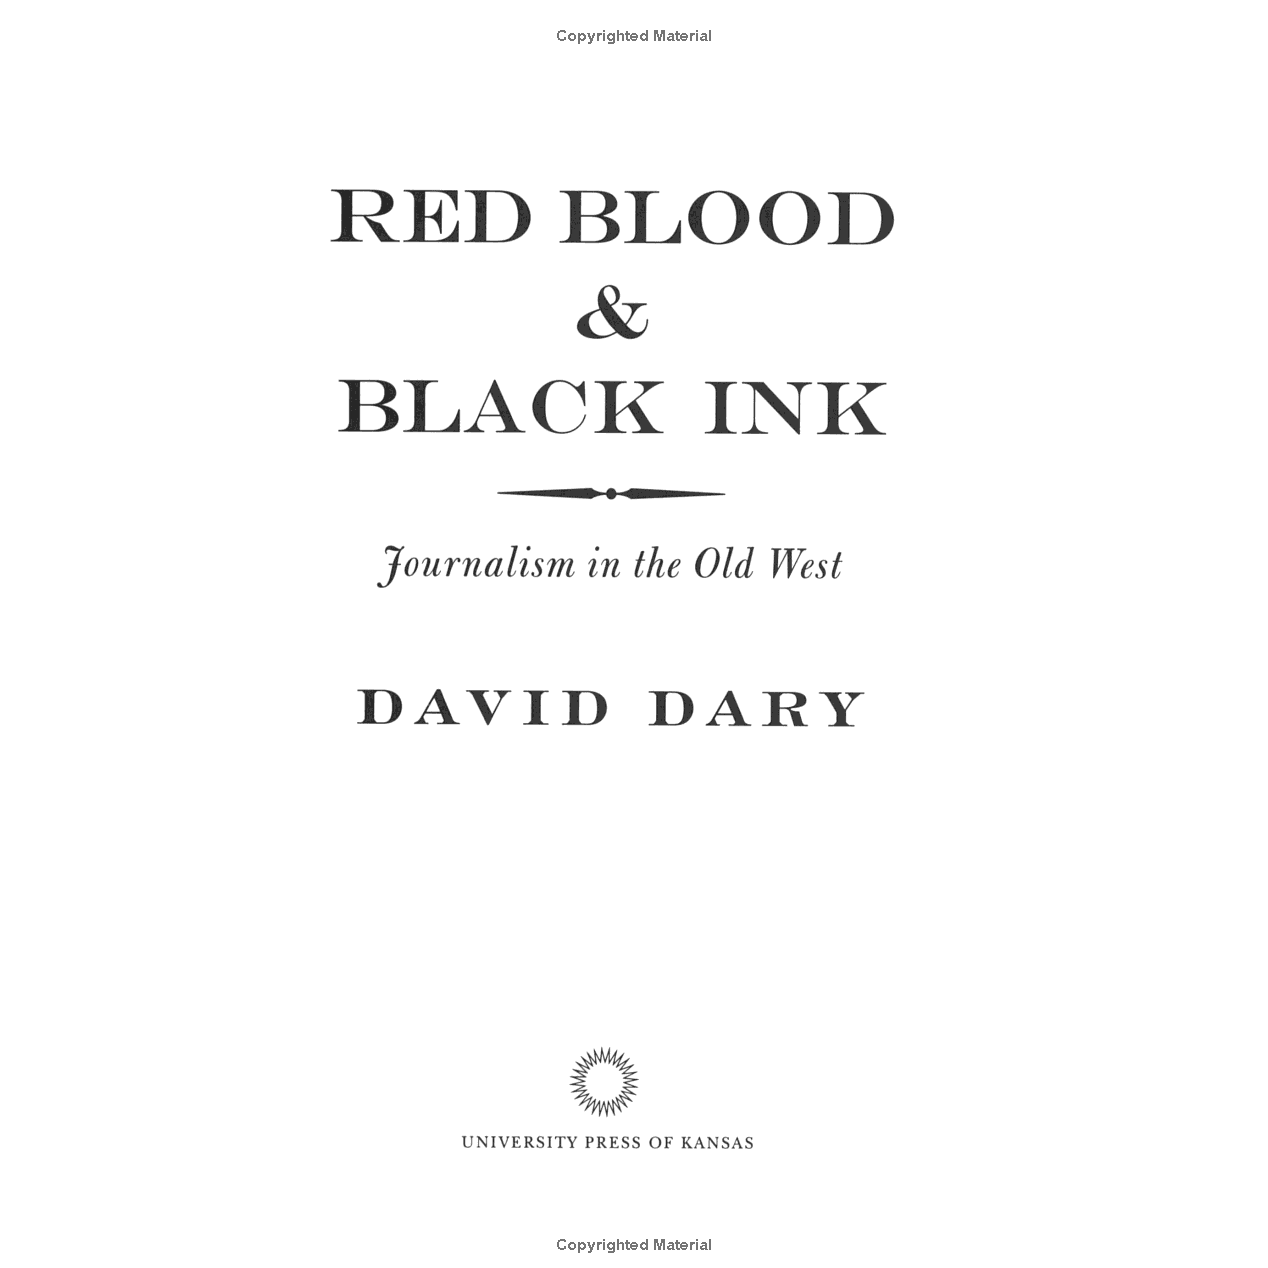 Red Blood and Black Ink: Journalism in the Old West by David Dary